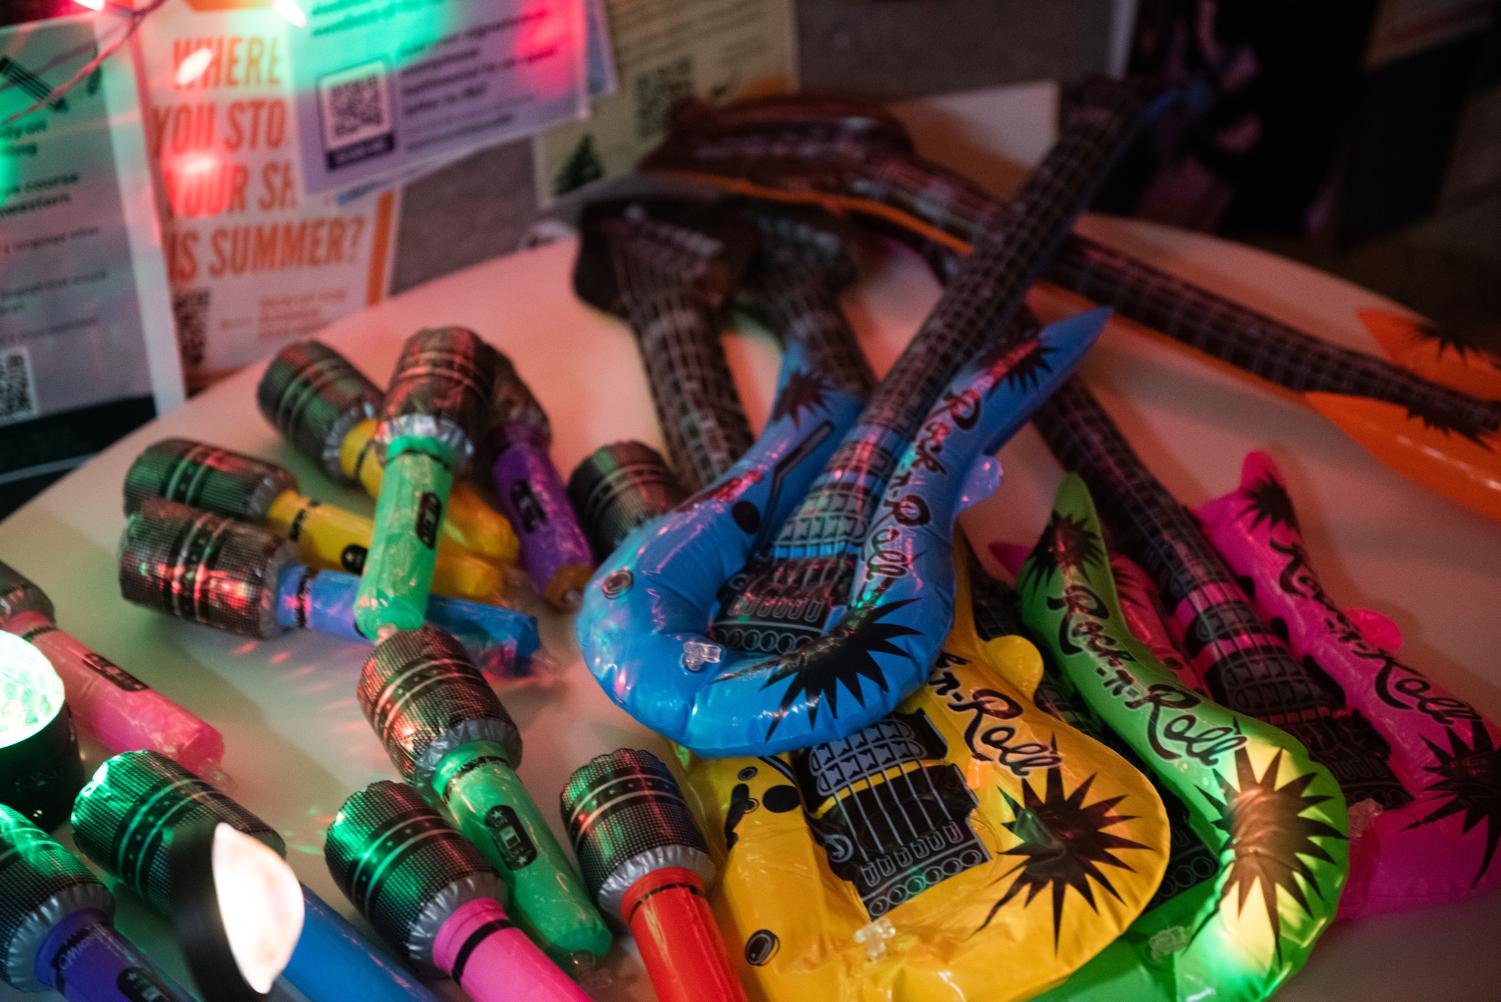 Inflatable guitars and microphones in various colors lie on a white table.